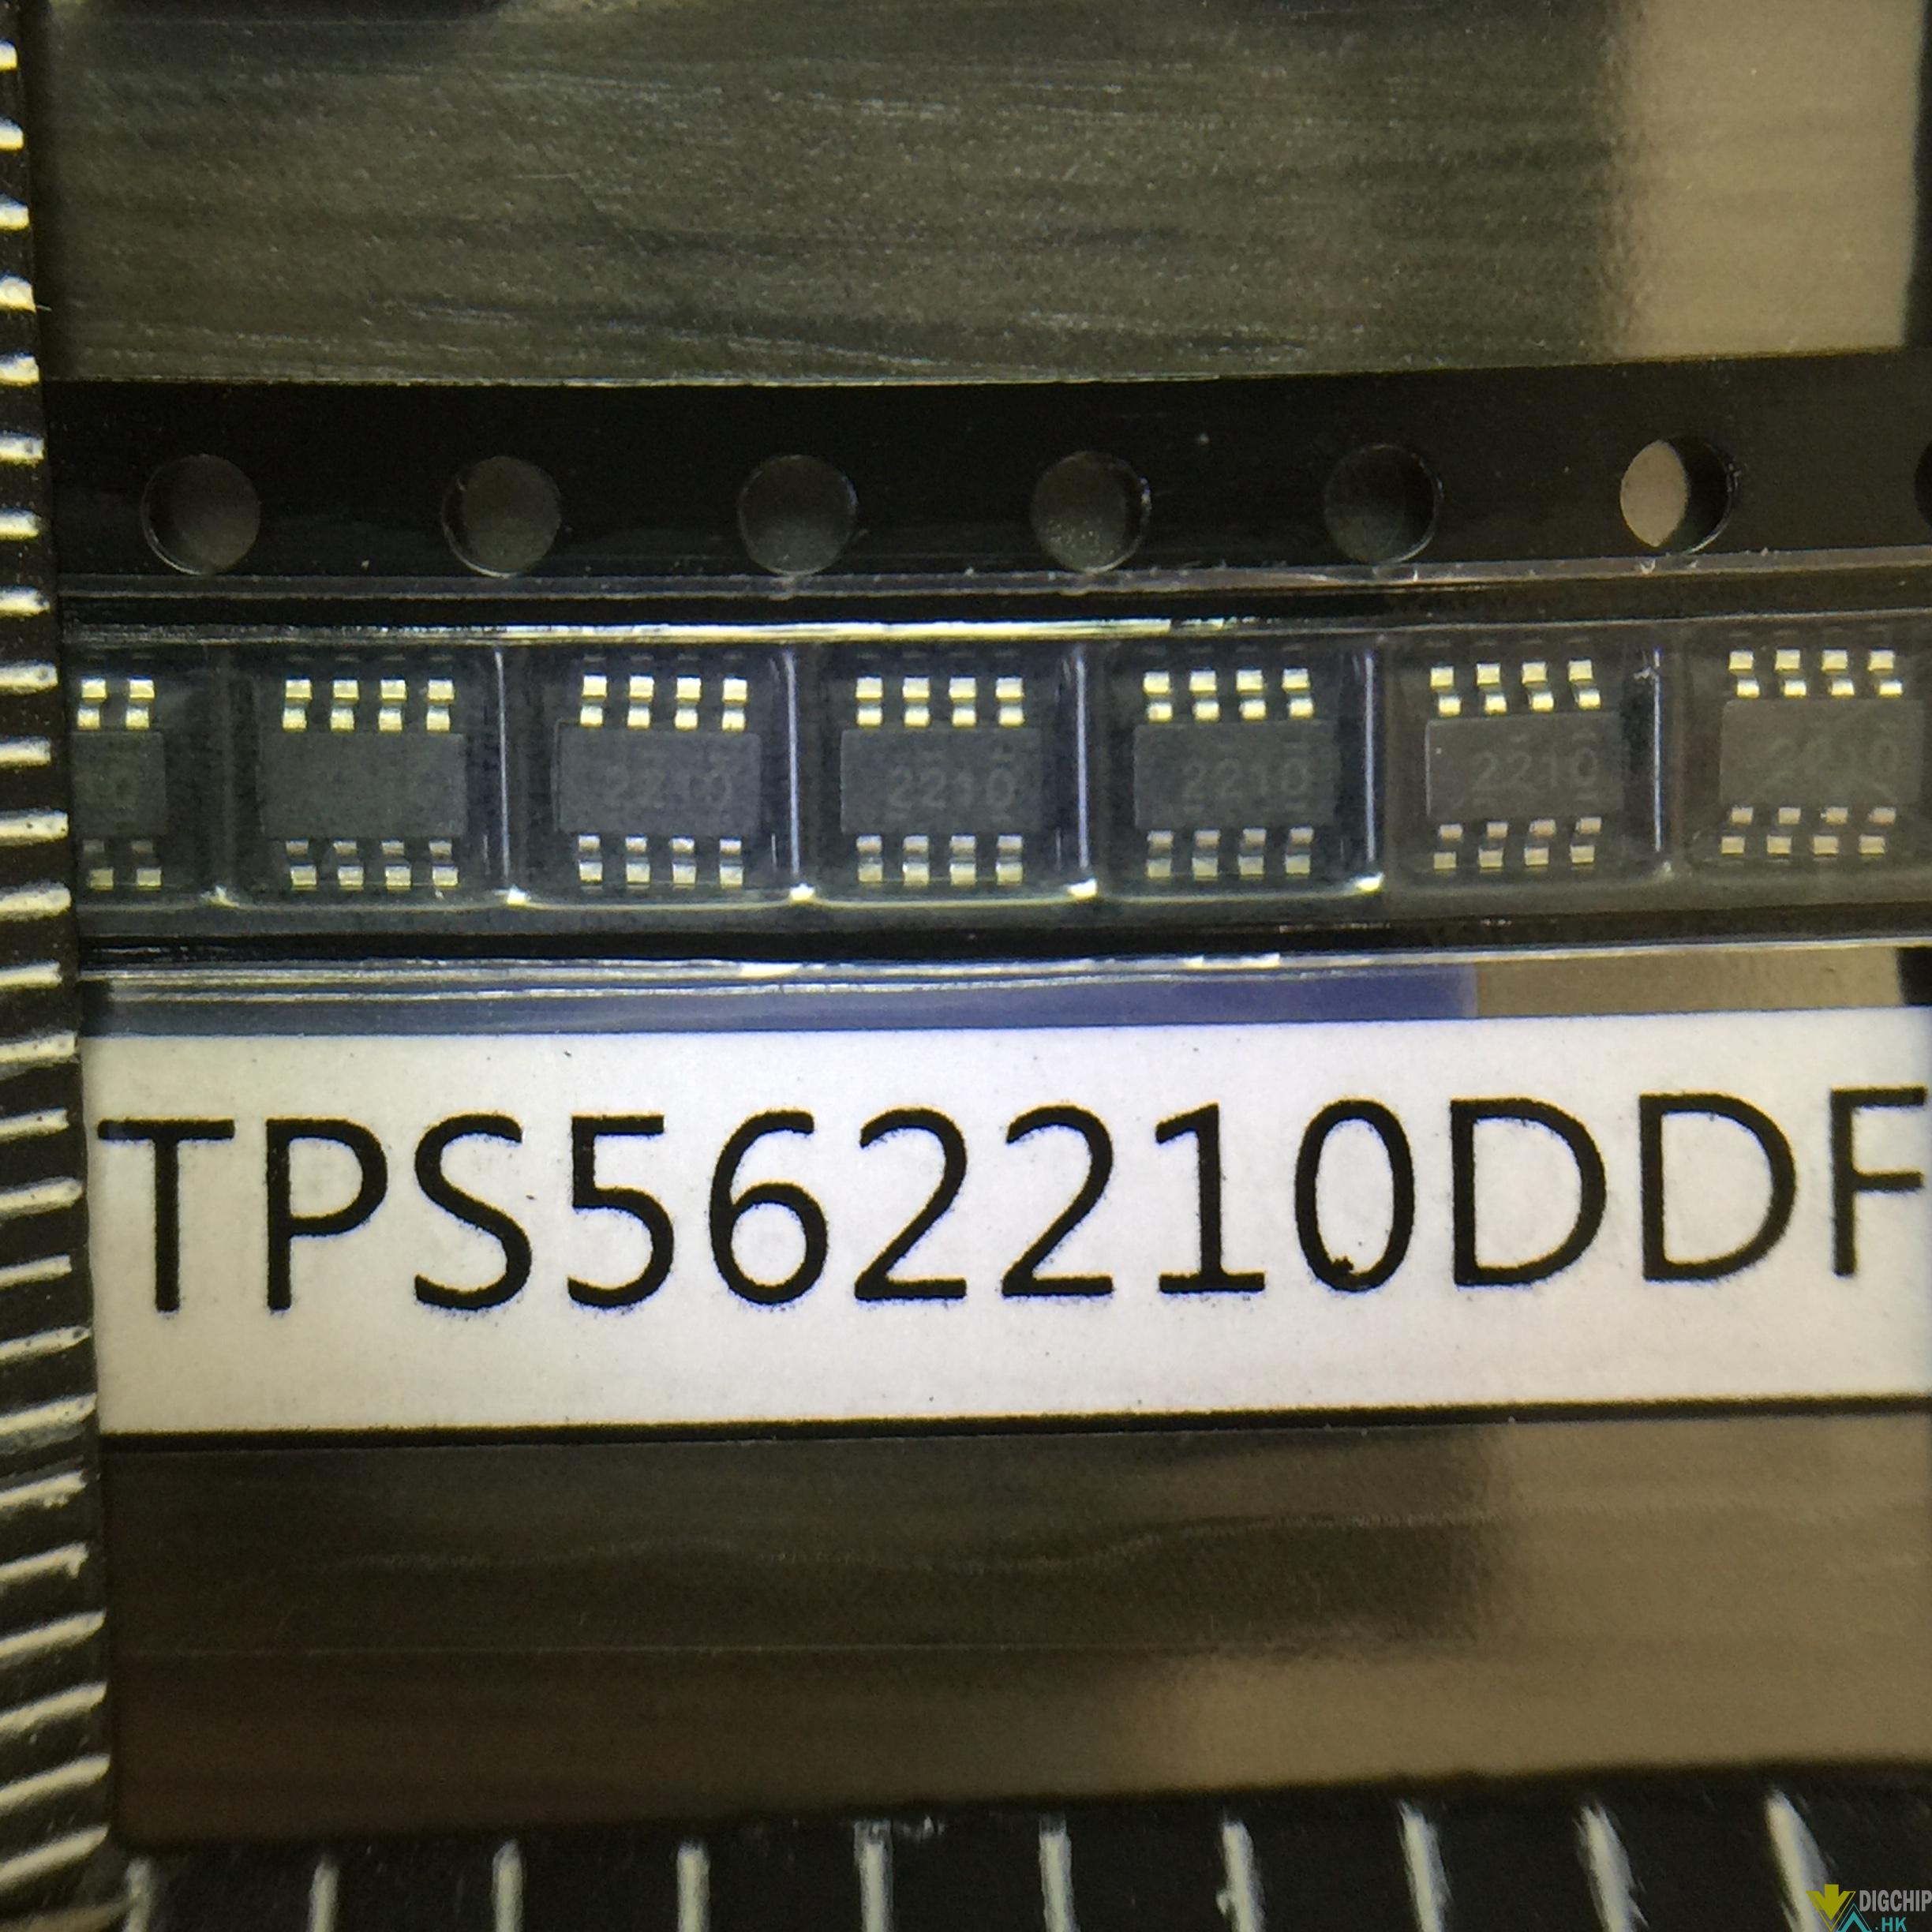 4.5-V to 17-V Input, 2-A, 3-A Synchronous Step-Down Voltage Regulator In 8-Pin SOT-23